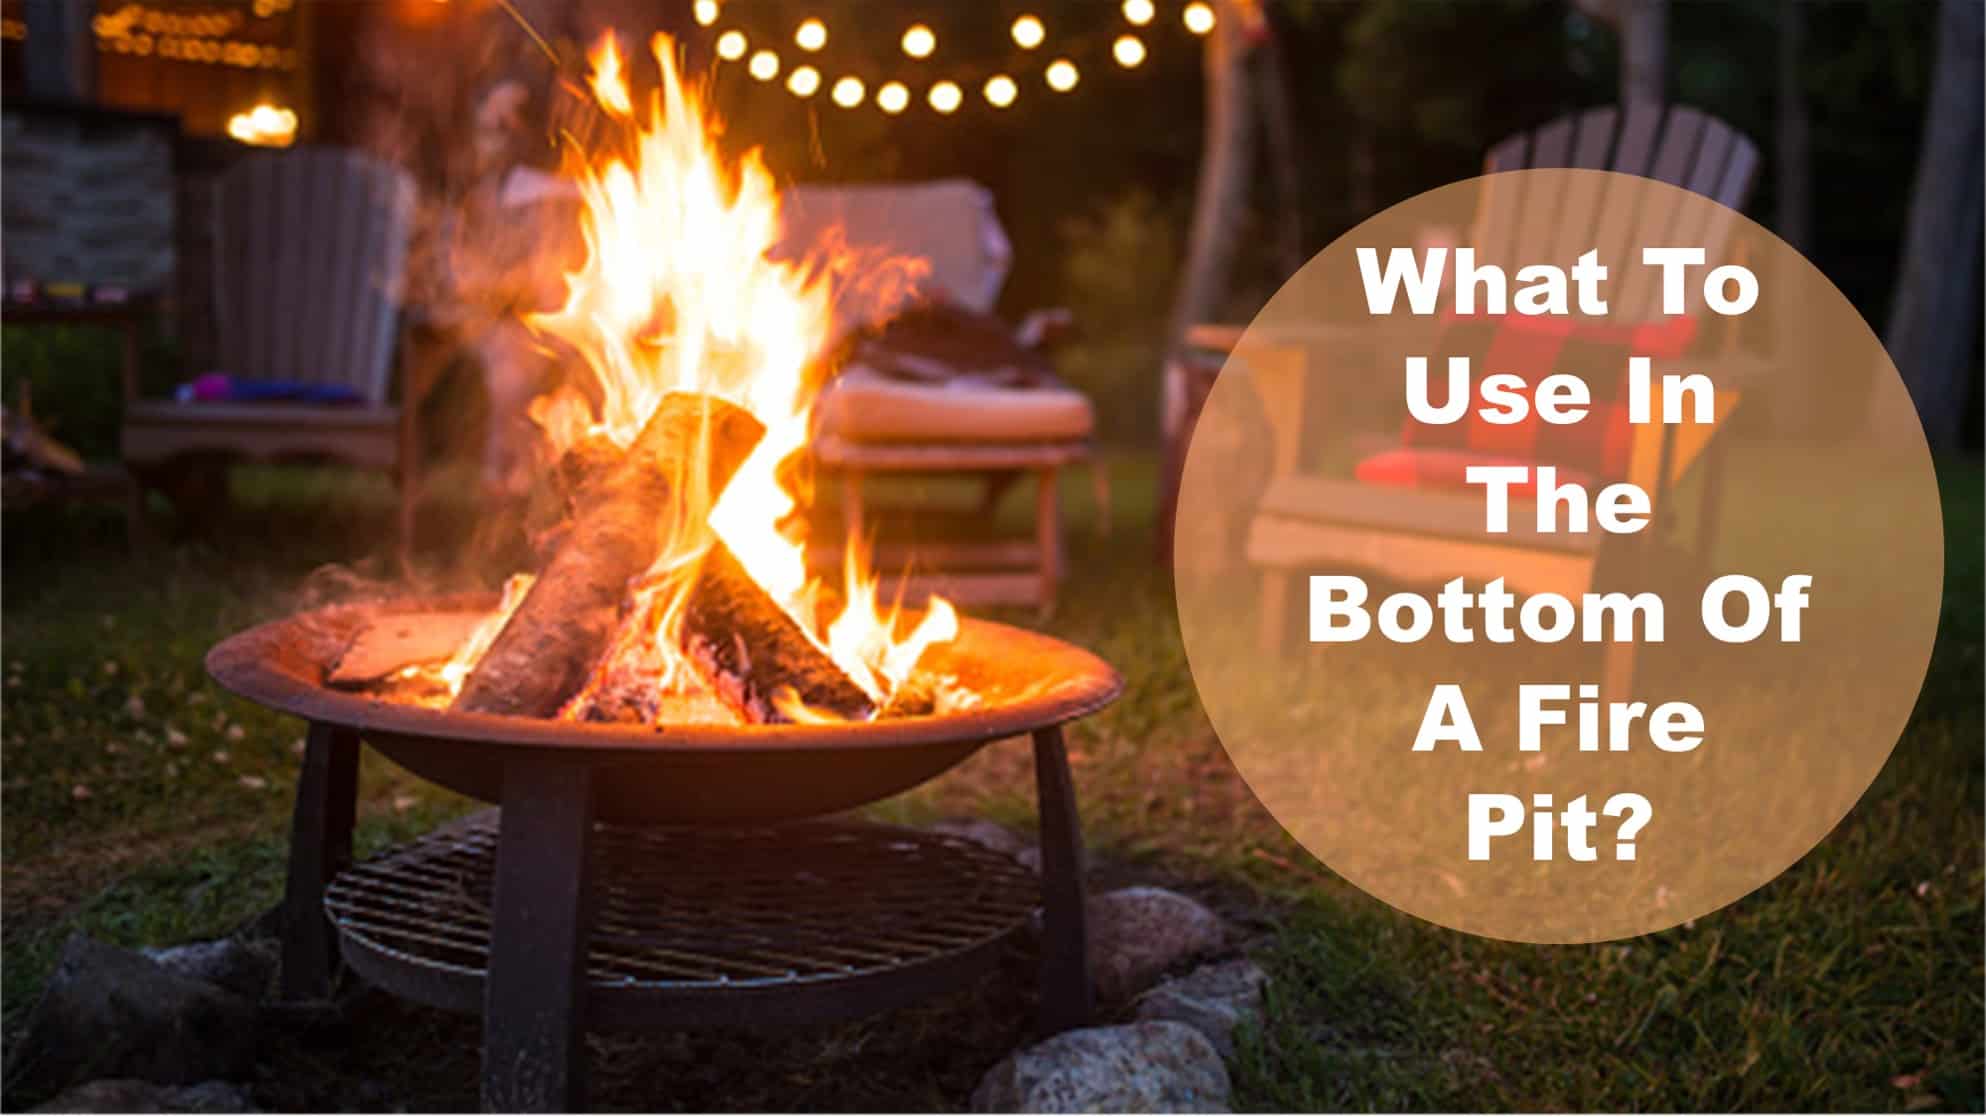 What To Use In The Bottom Of A Fire Pit, What To Put In Bottom Of Fire Pit